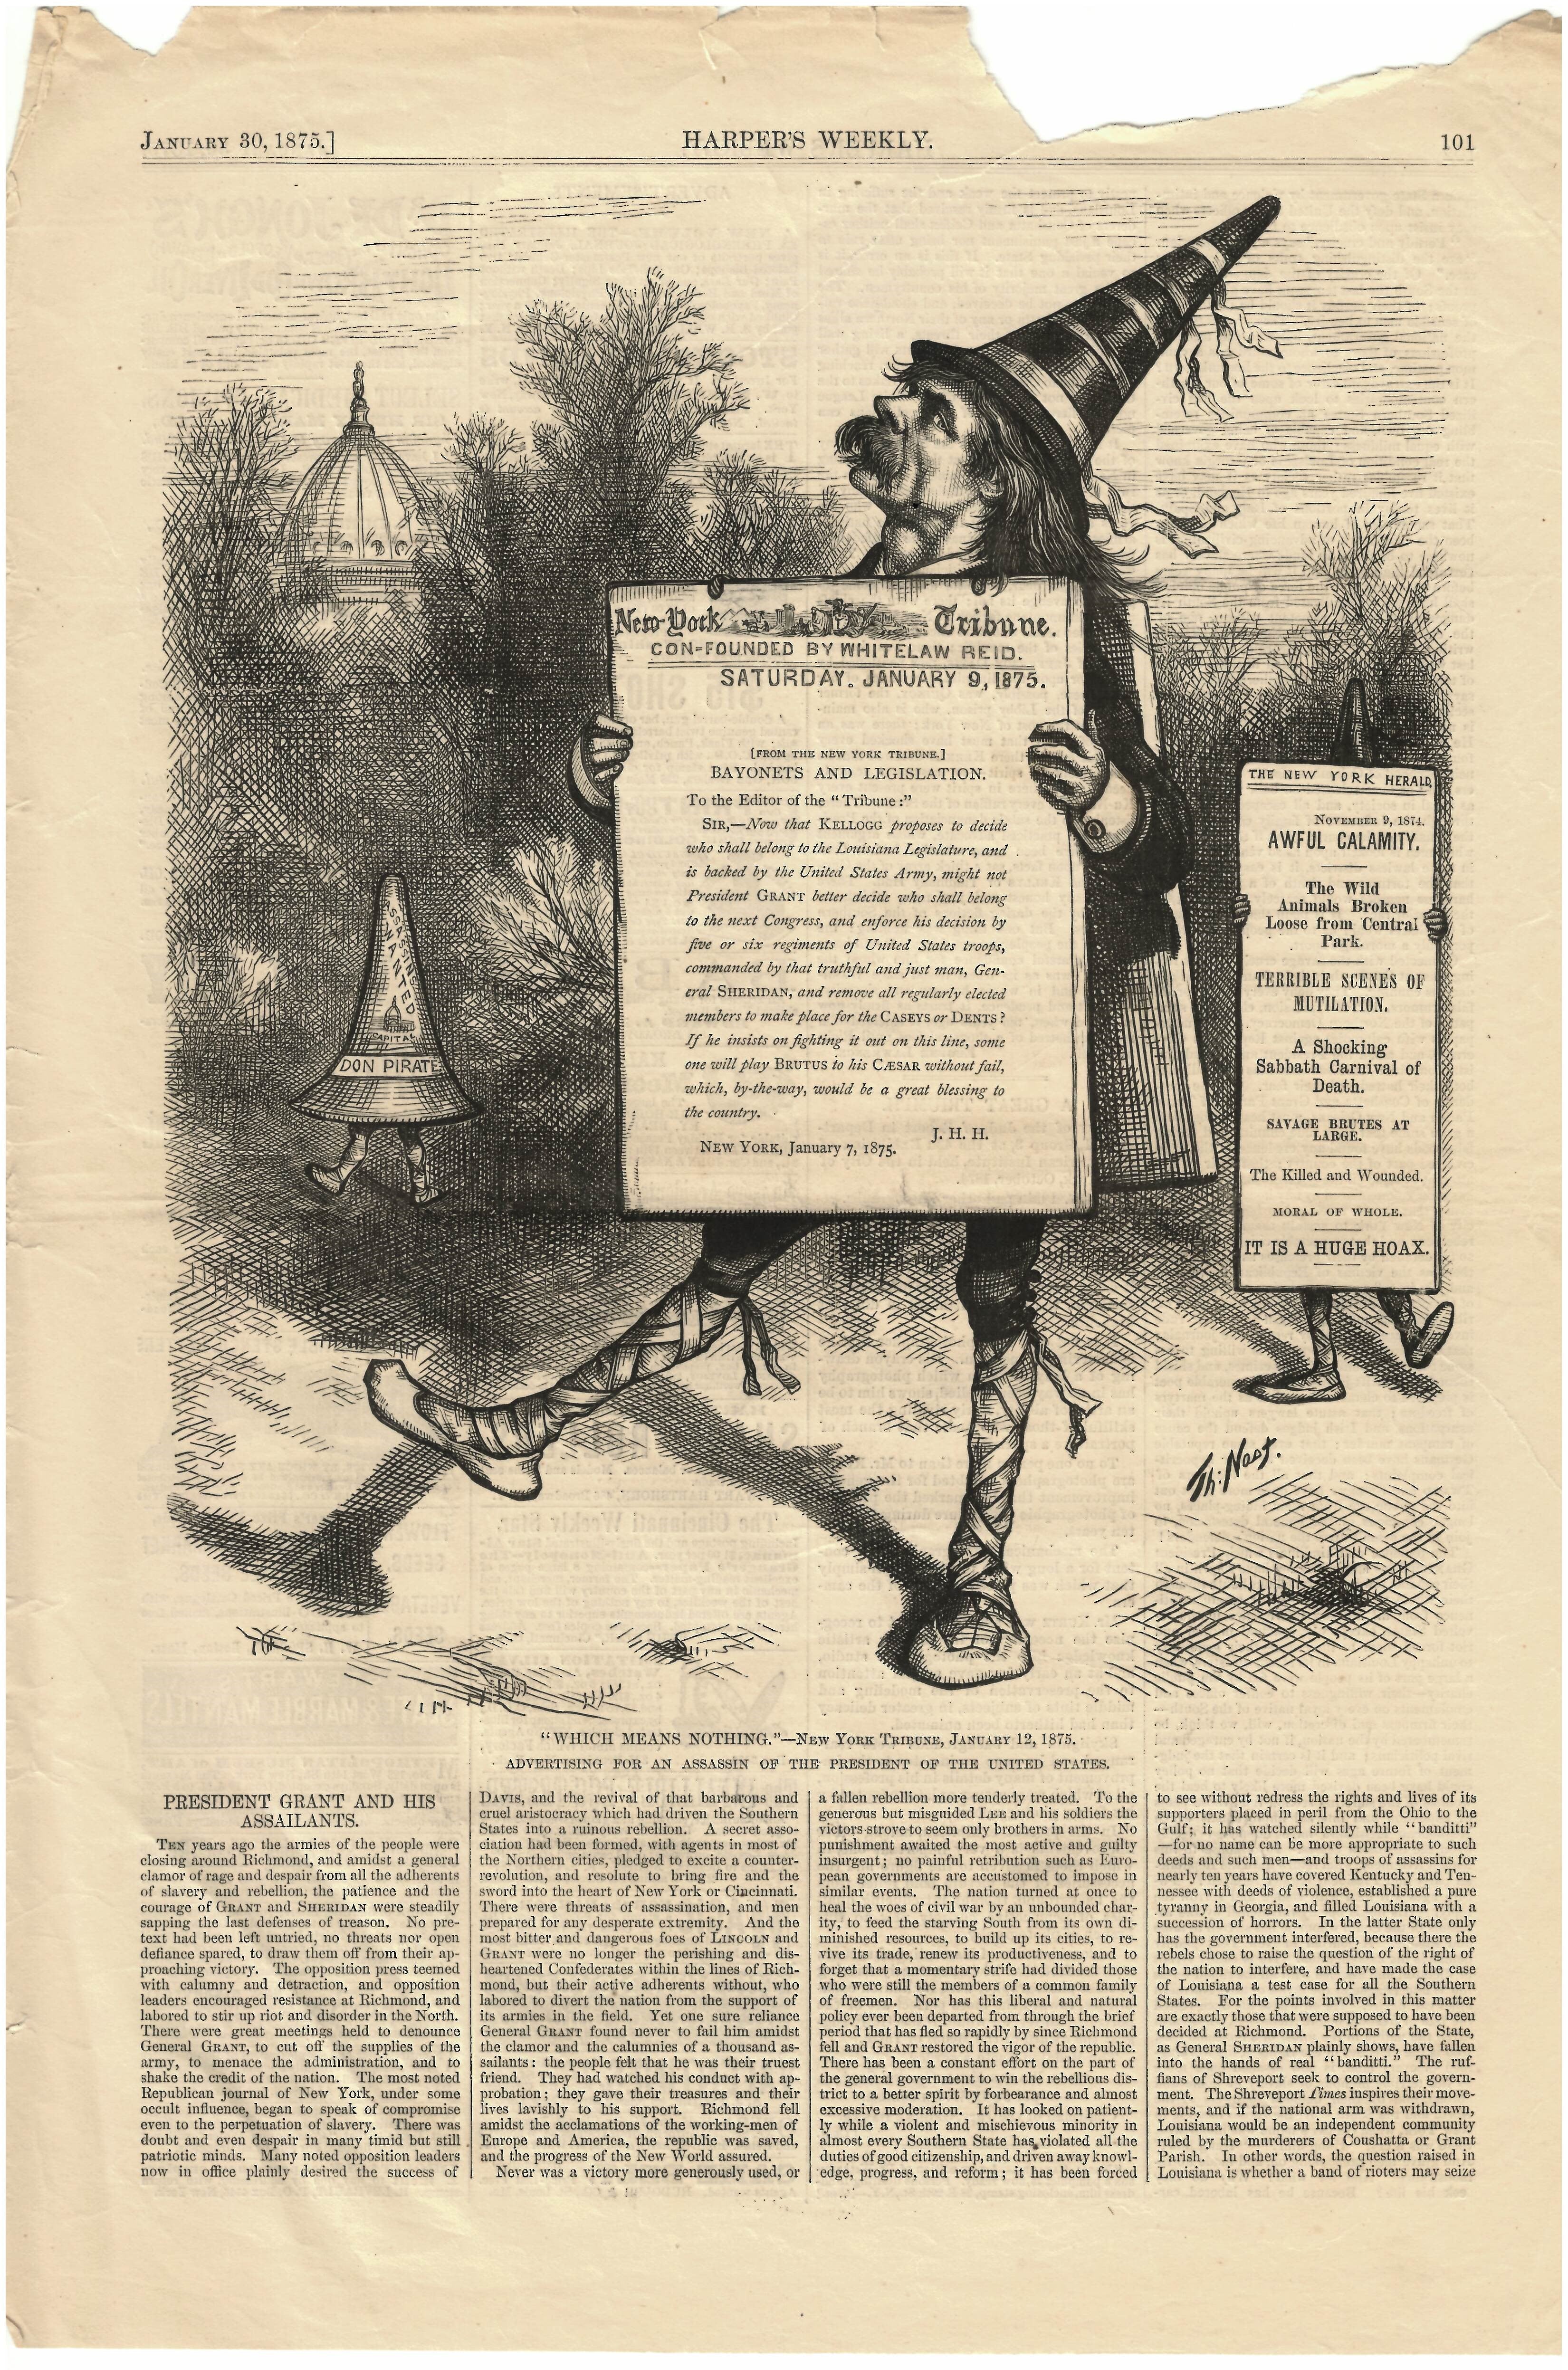 Harper's Weekly January 30, 1875 "Which Means Nothing." Ad Print